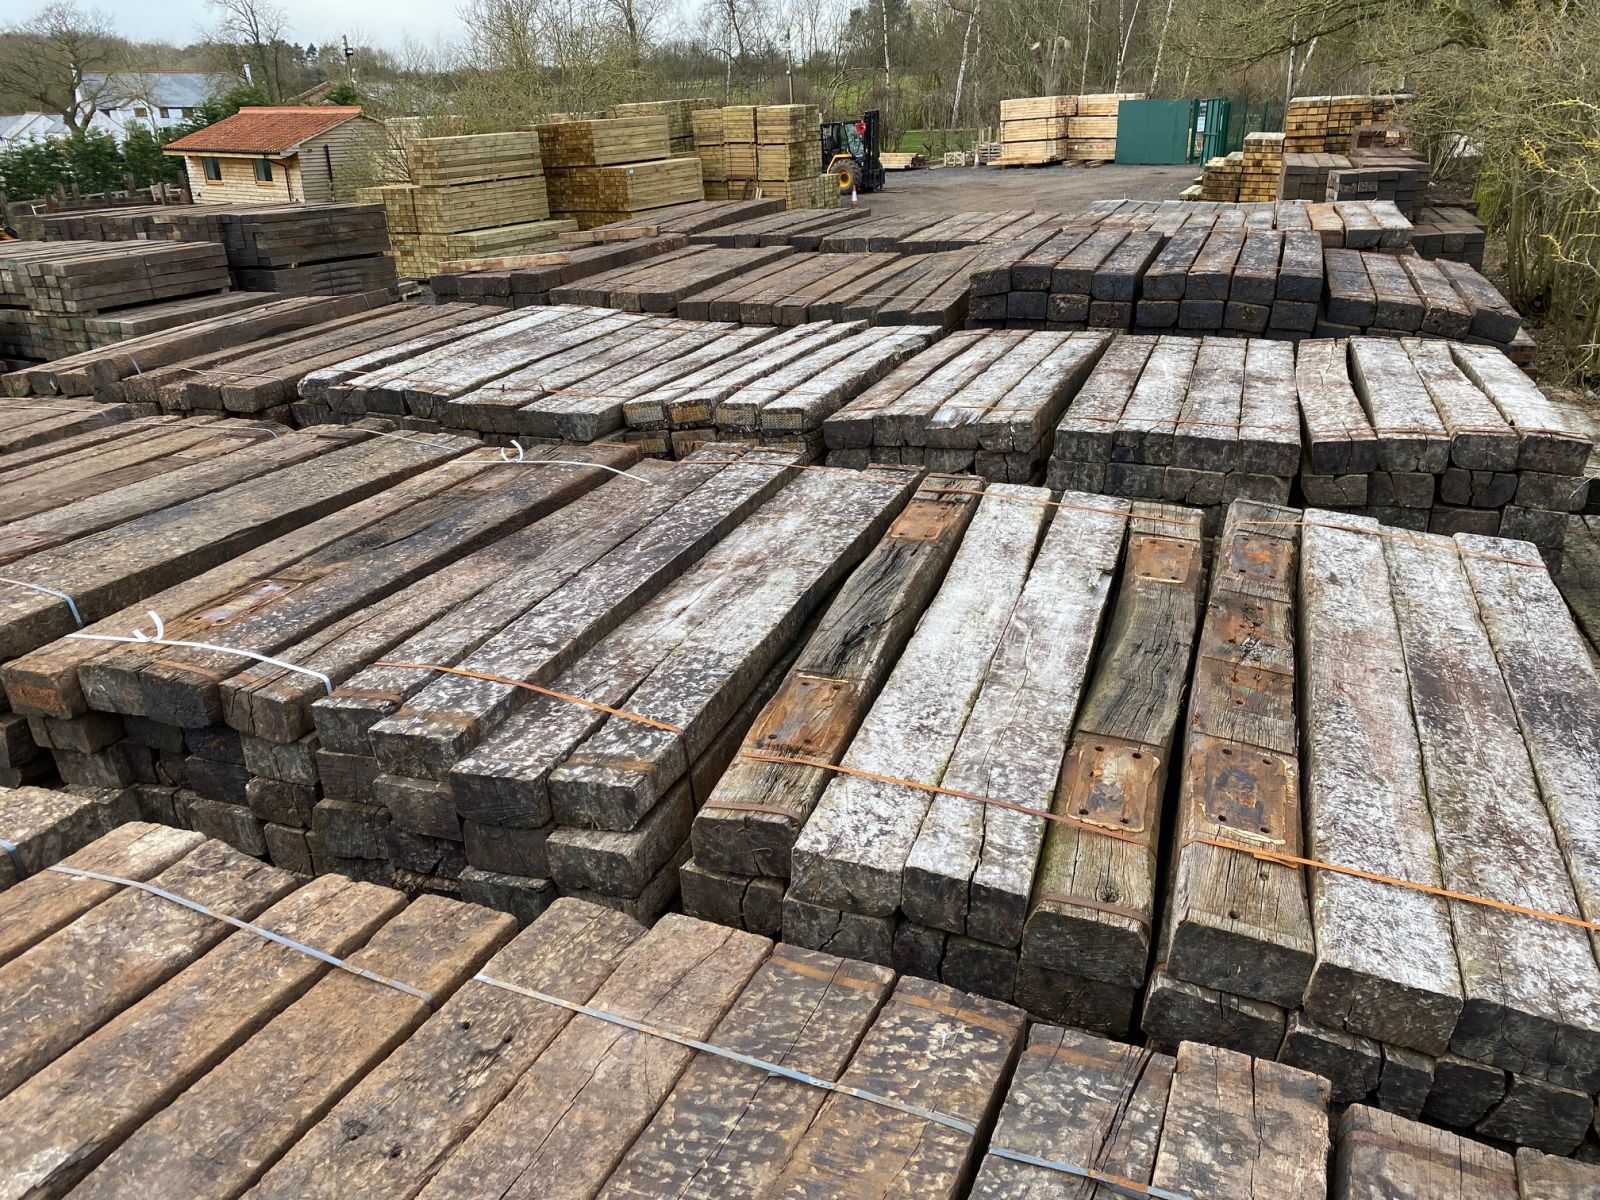 A wide range of new and used railway sleepers from our yard at Railwaysleepers.com